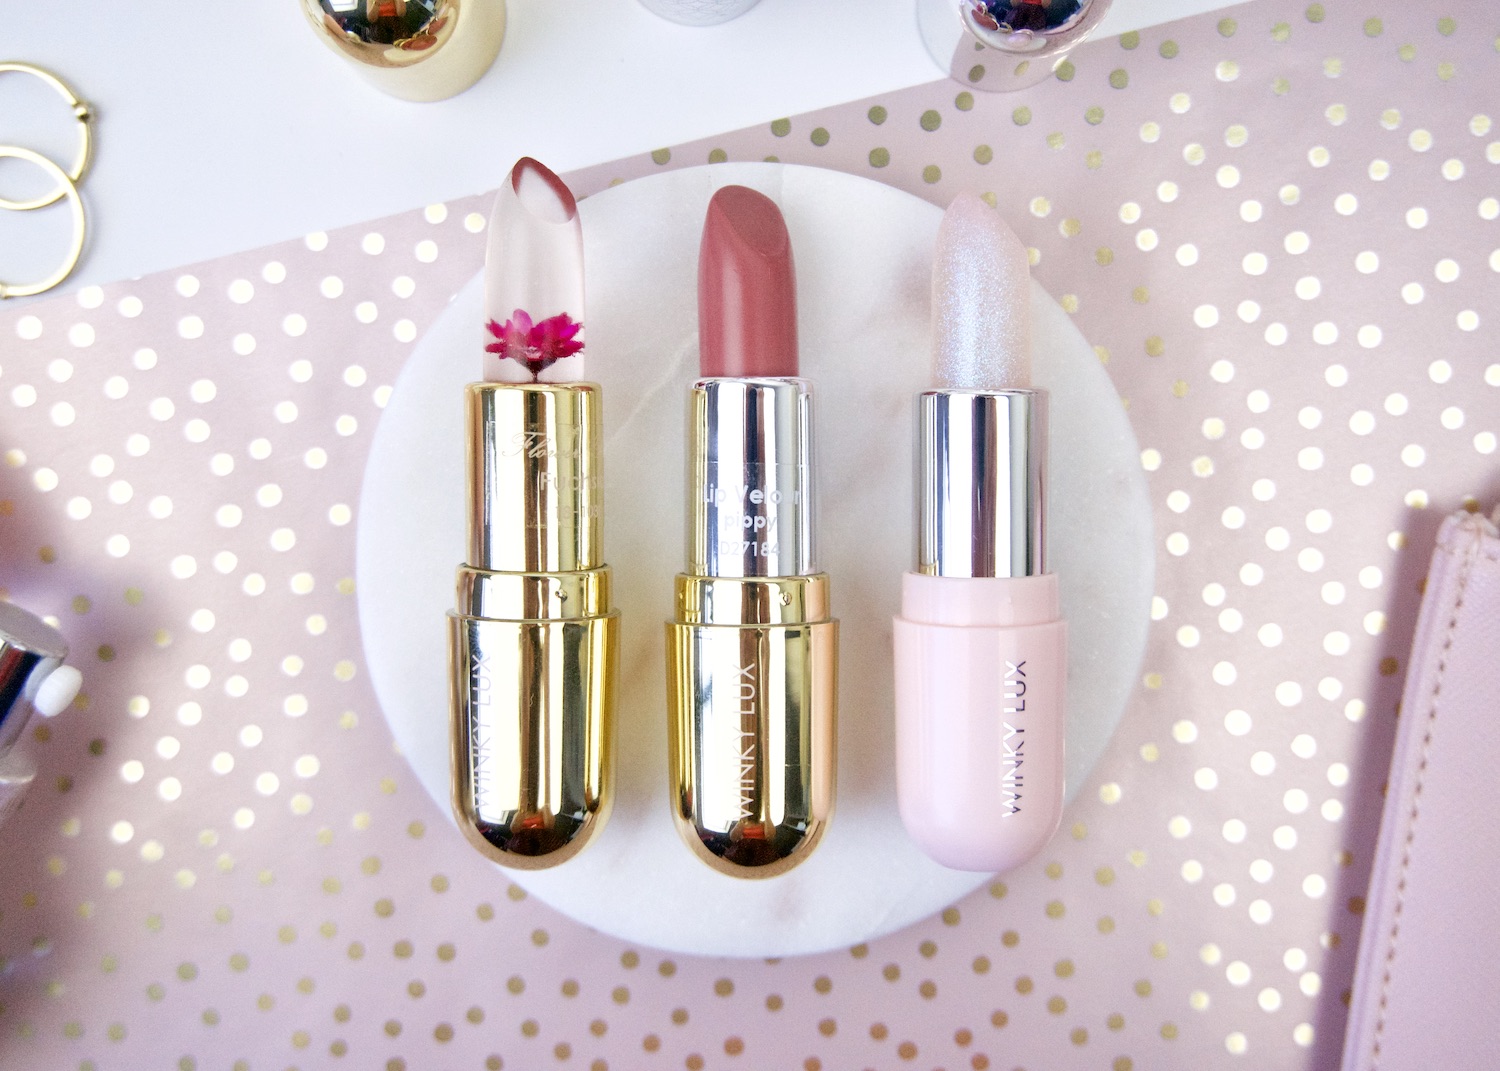 Winky Lux lip products